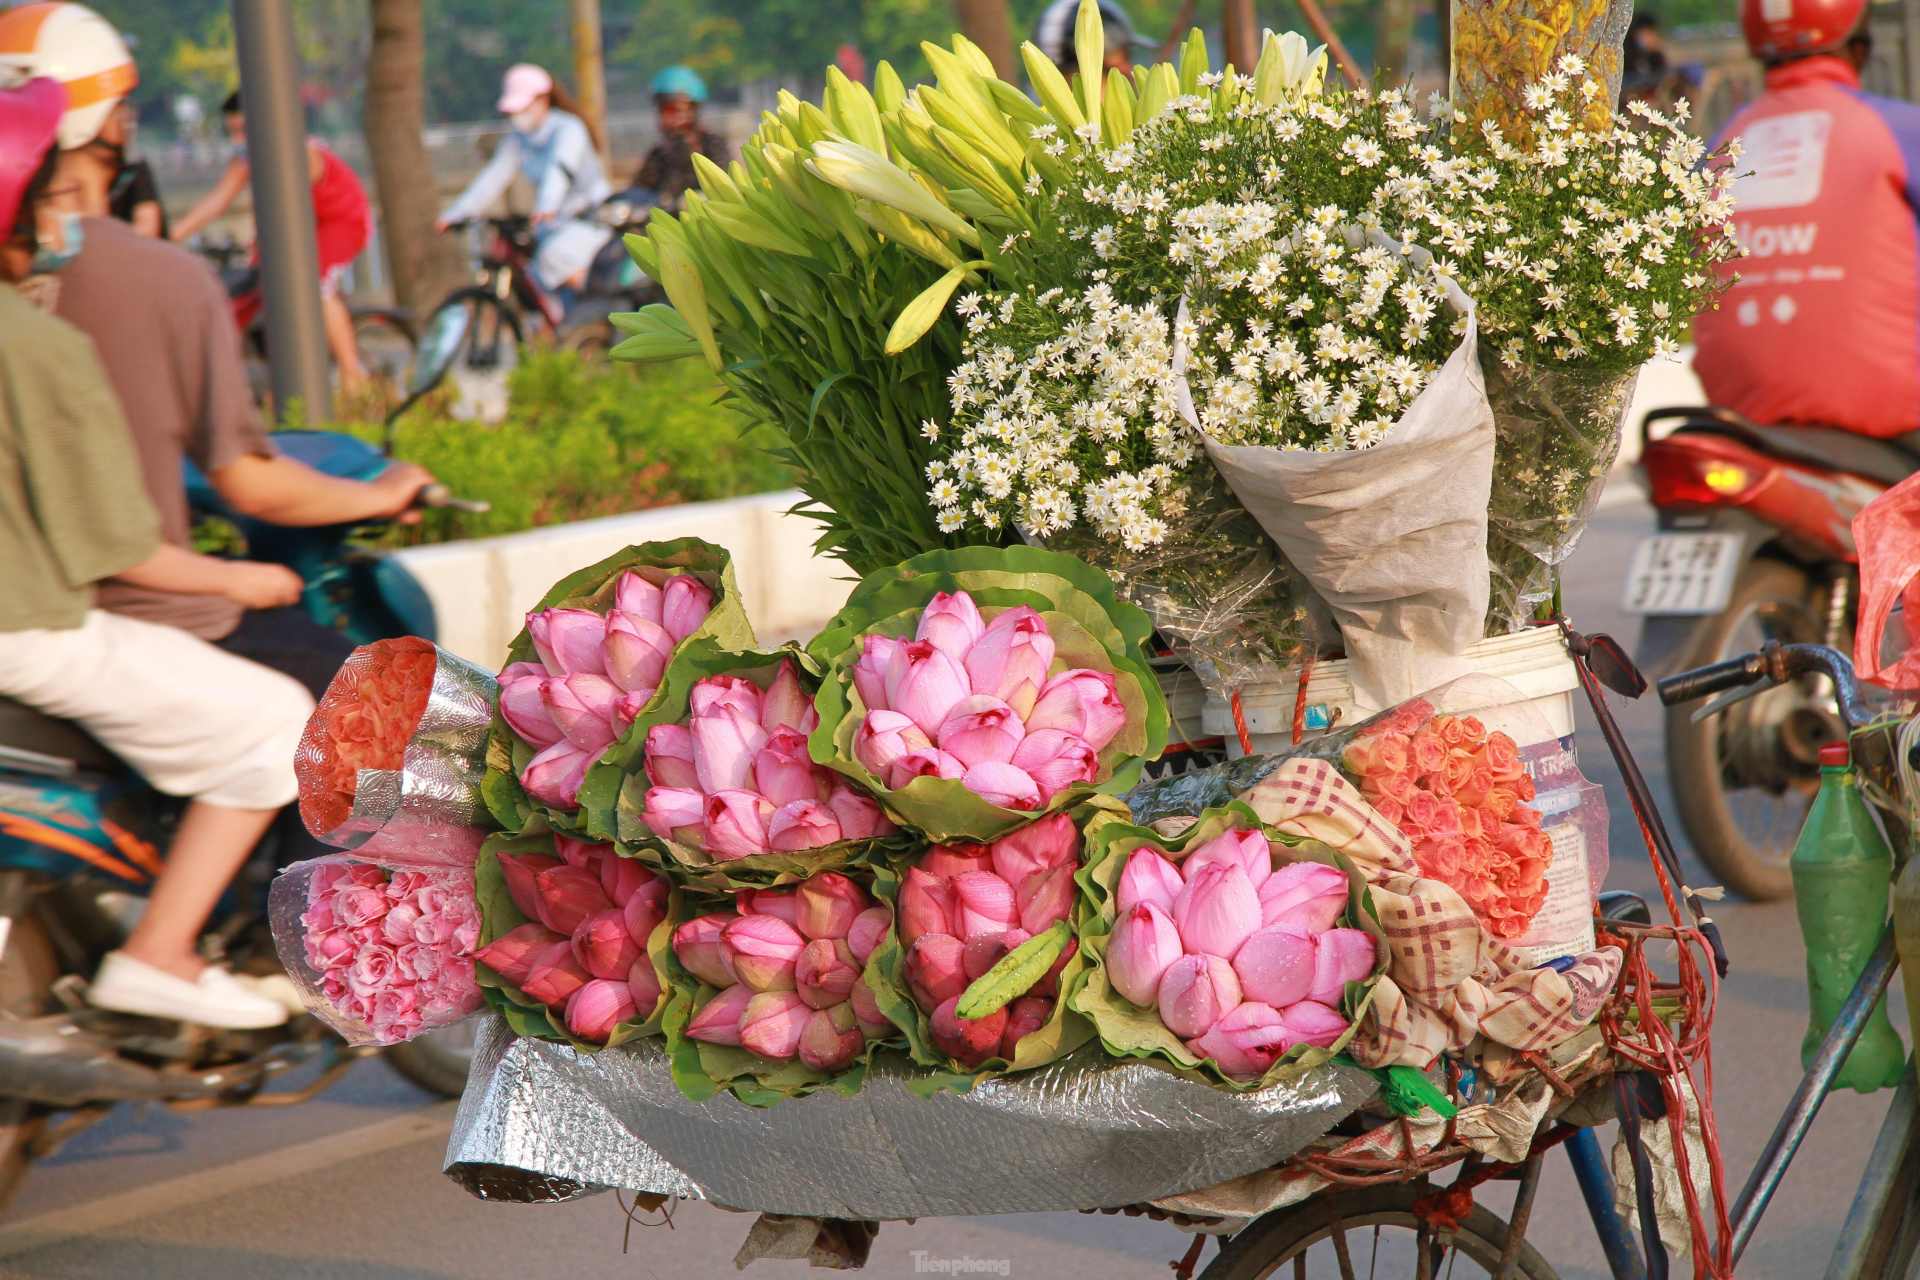 In photo: The vibrant colors of lotus blossom on Hanoi streets